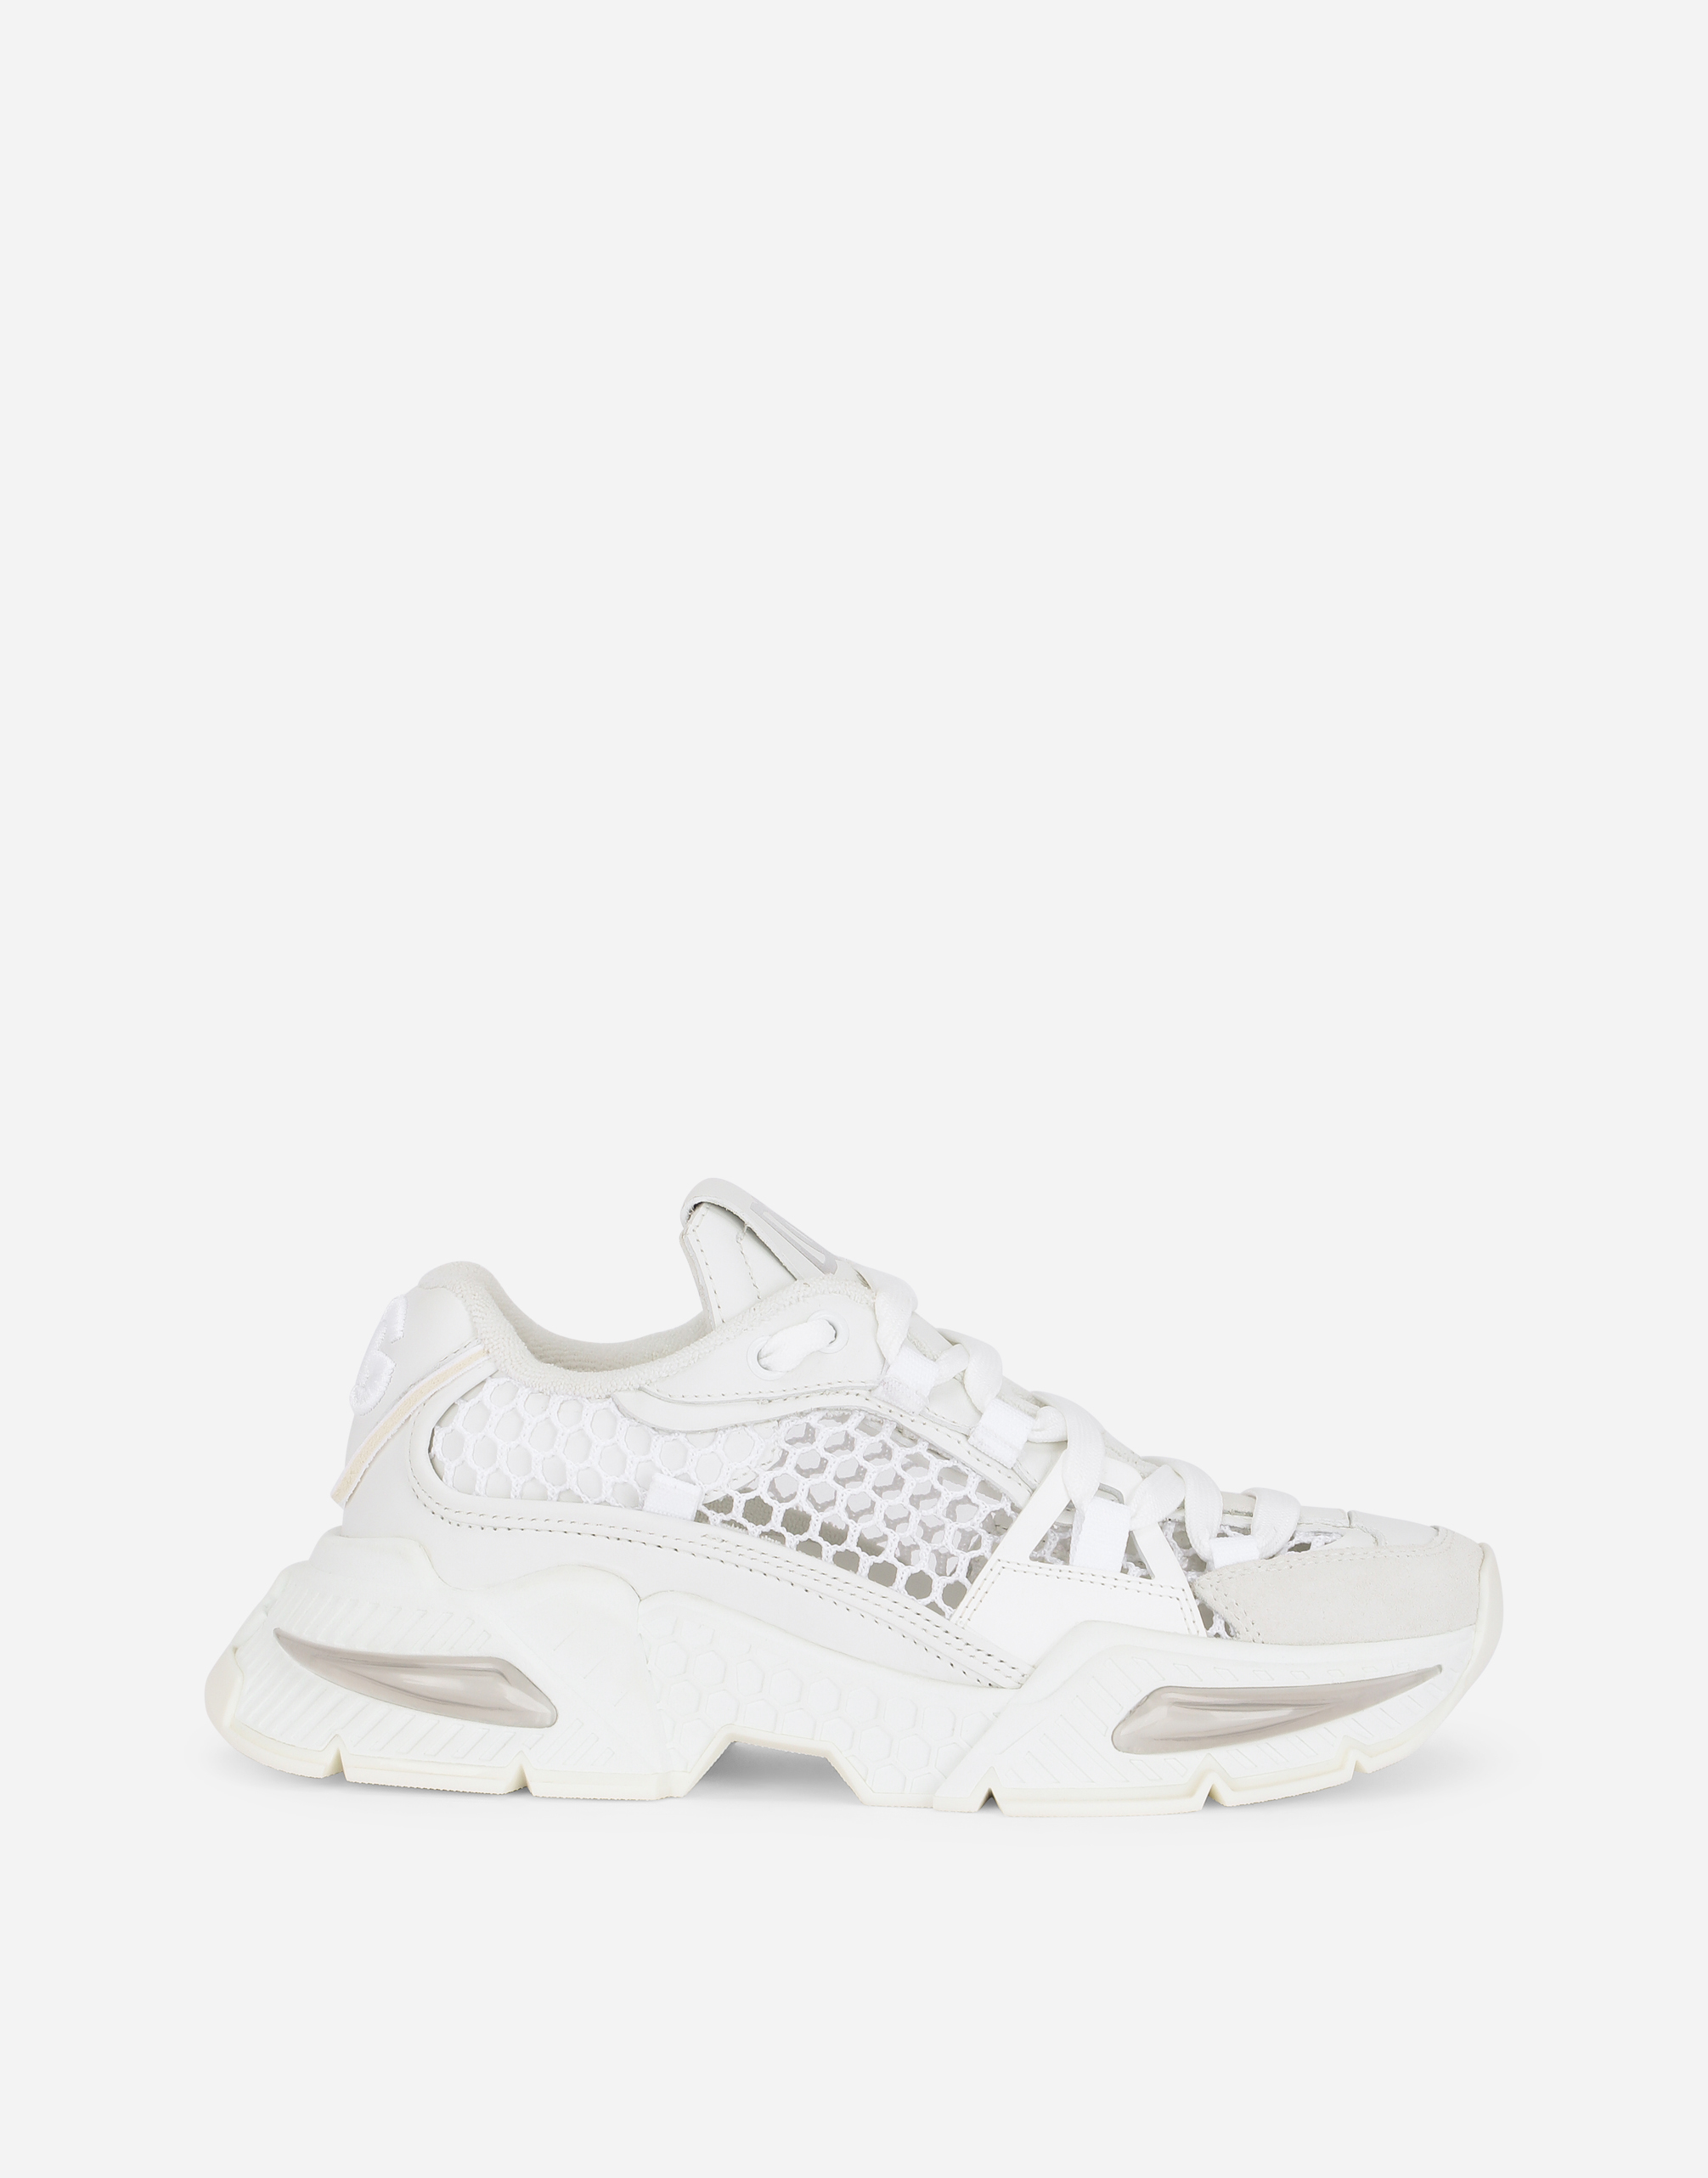 Mixed-material Airmaster sneakers in White for Women 